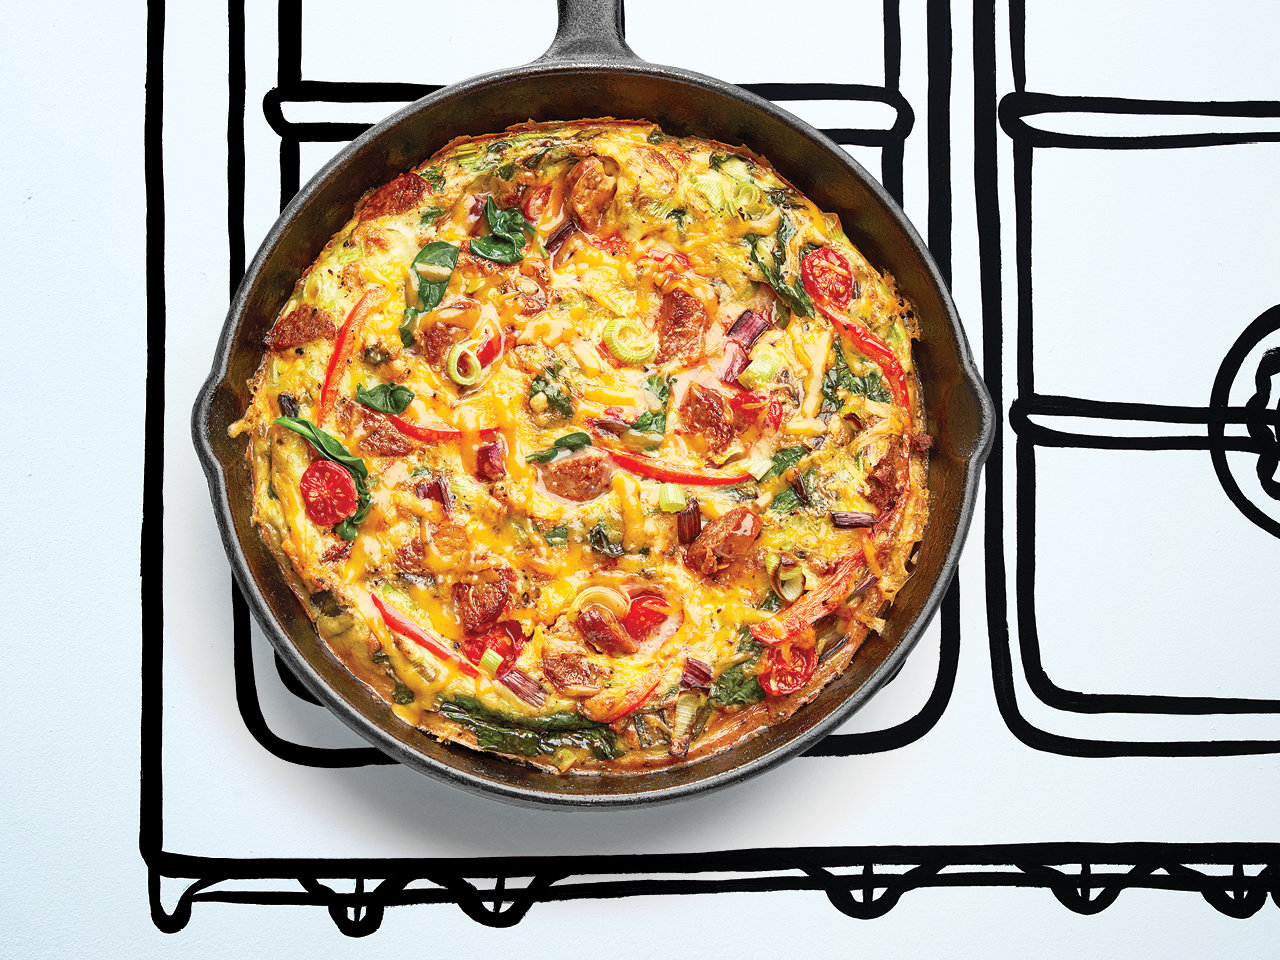 How to make a frittata using kitchen scraps